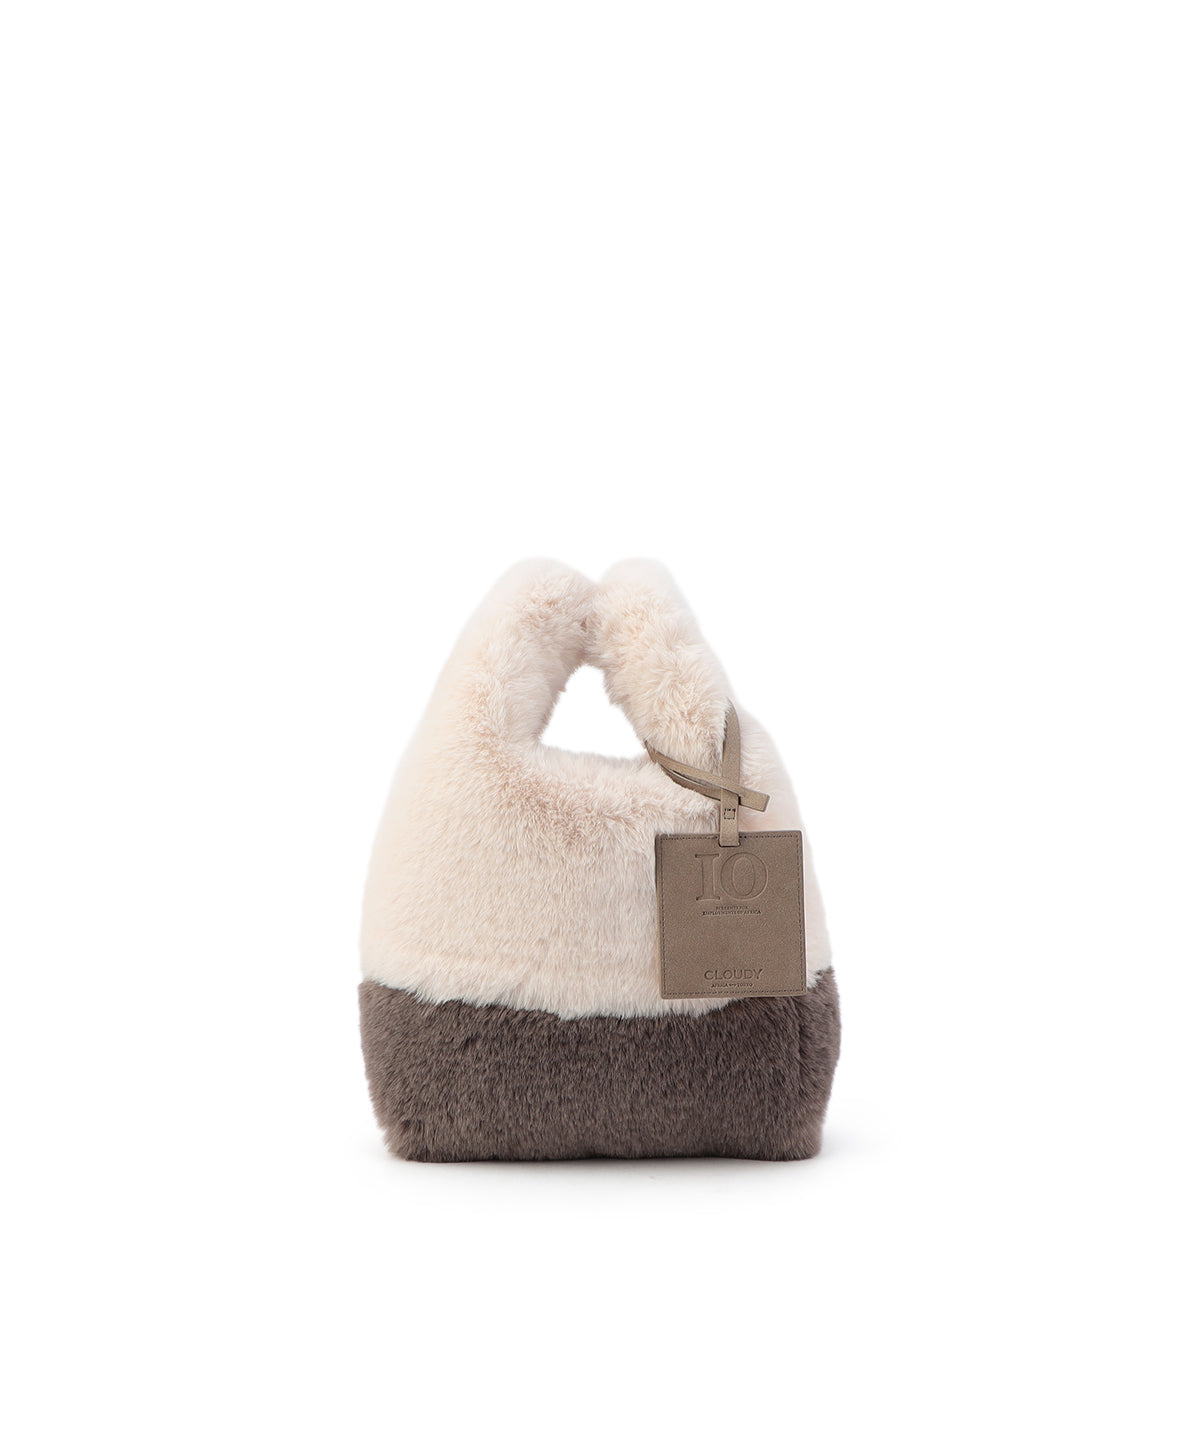 Eco Fur Convenience Bag (Small) OFF-WHITE×GREIGE